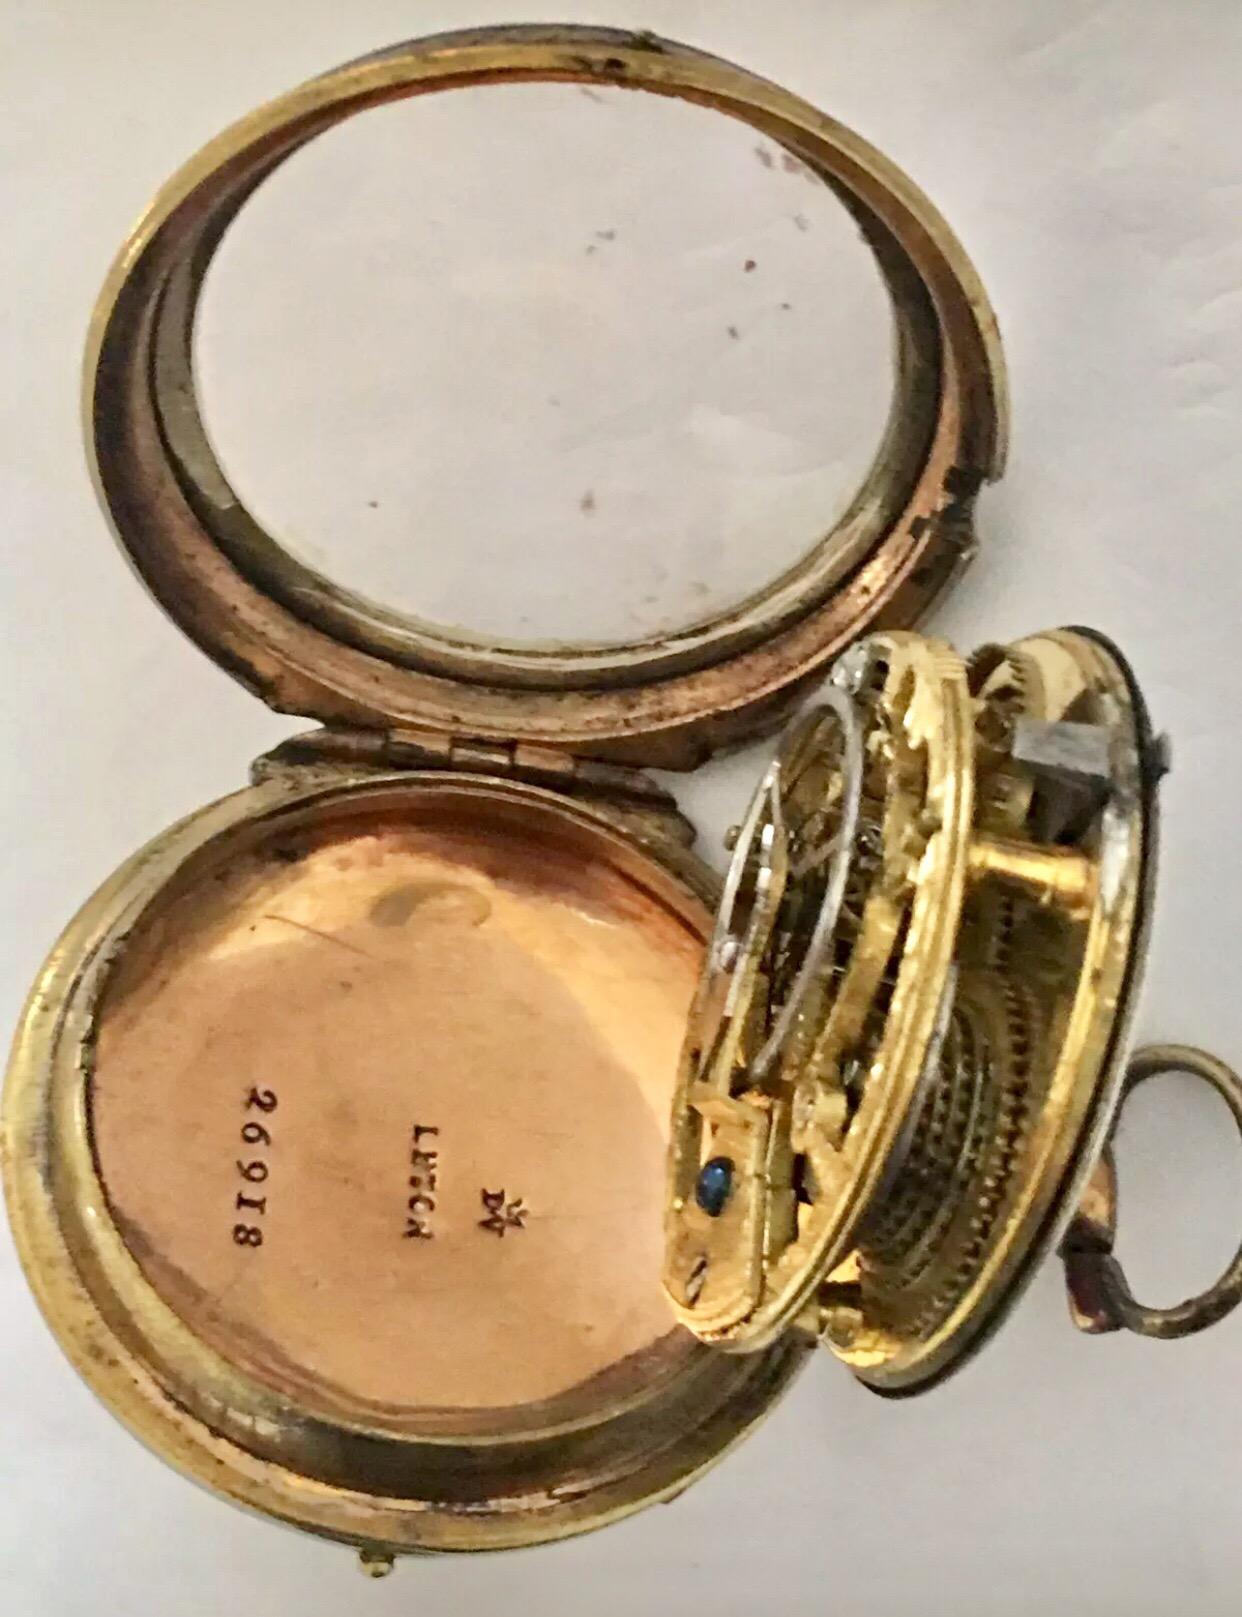 18th century pocket watch reproduction